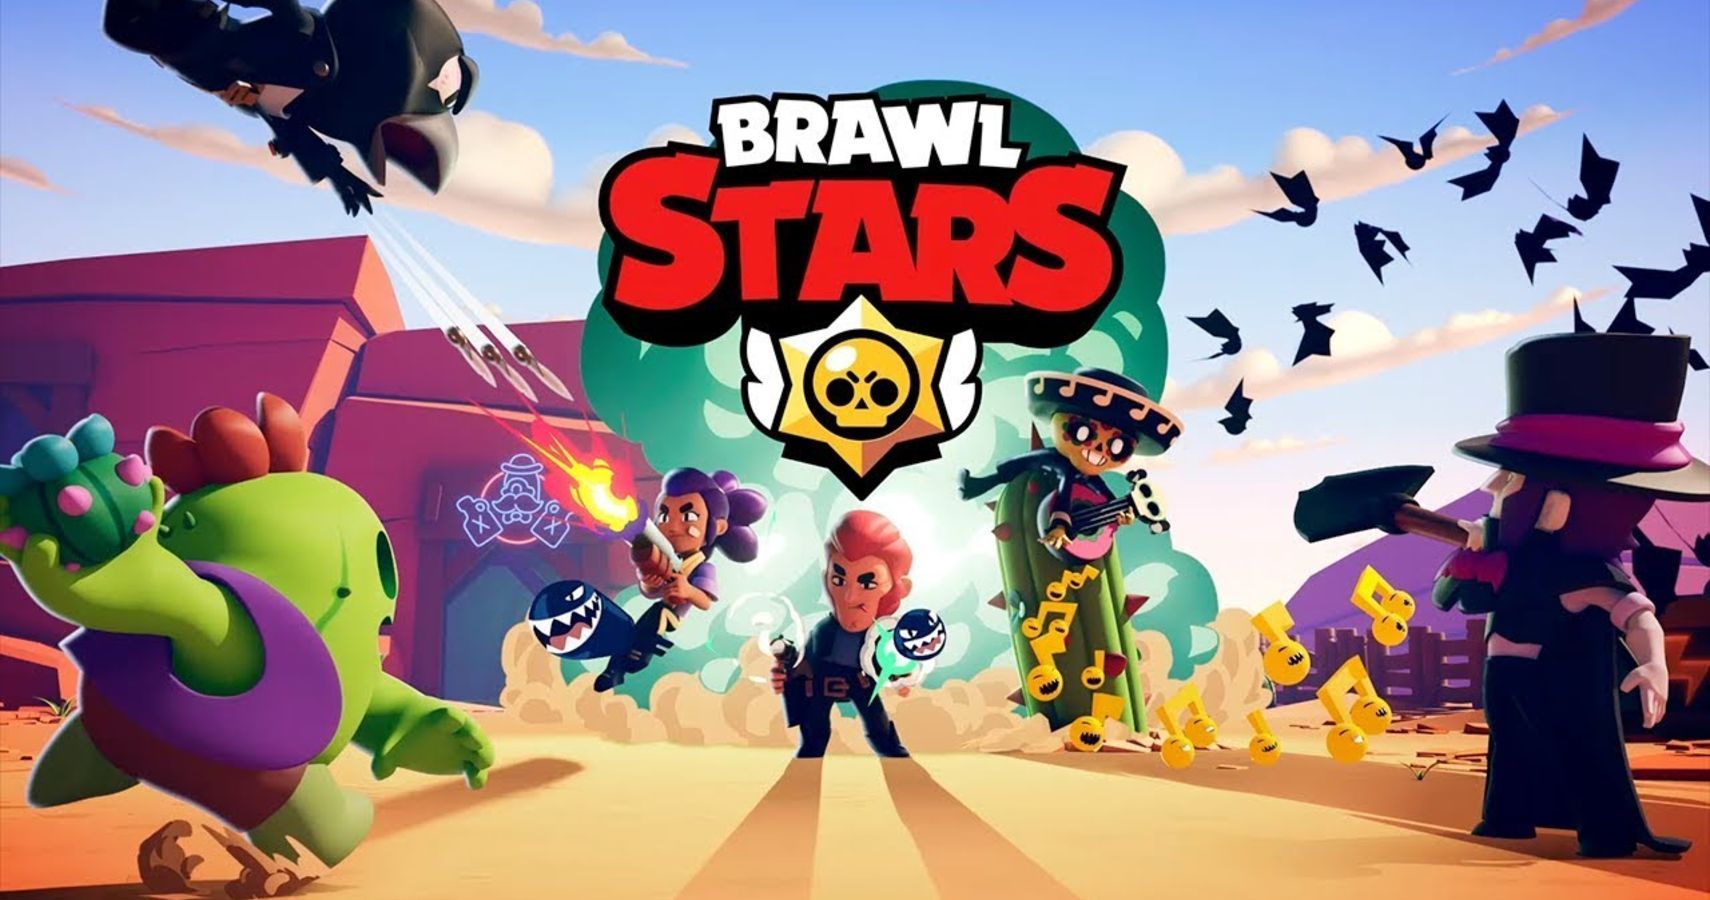 In Under A Year, Brawl Stars Grossed Over $400 Million